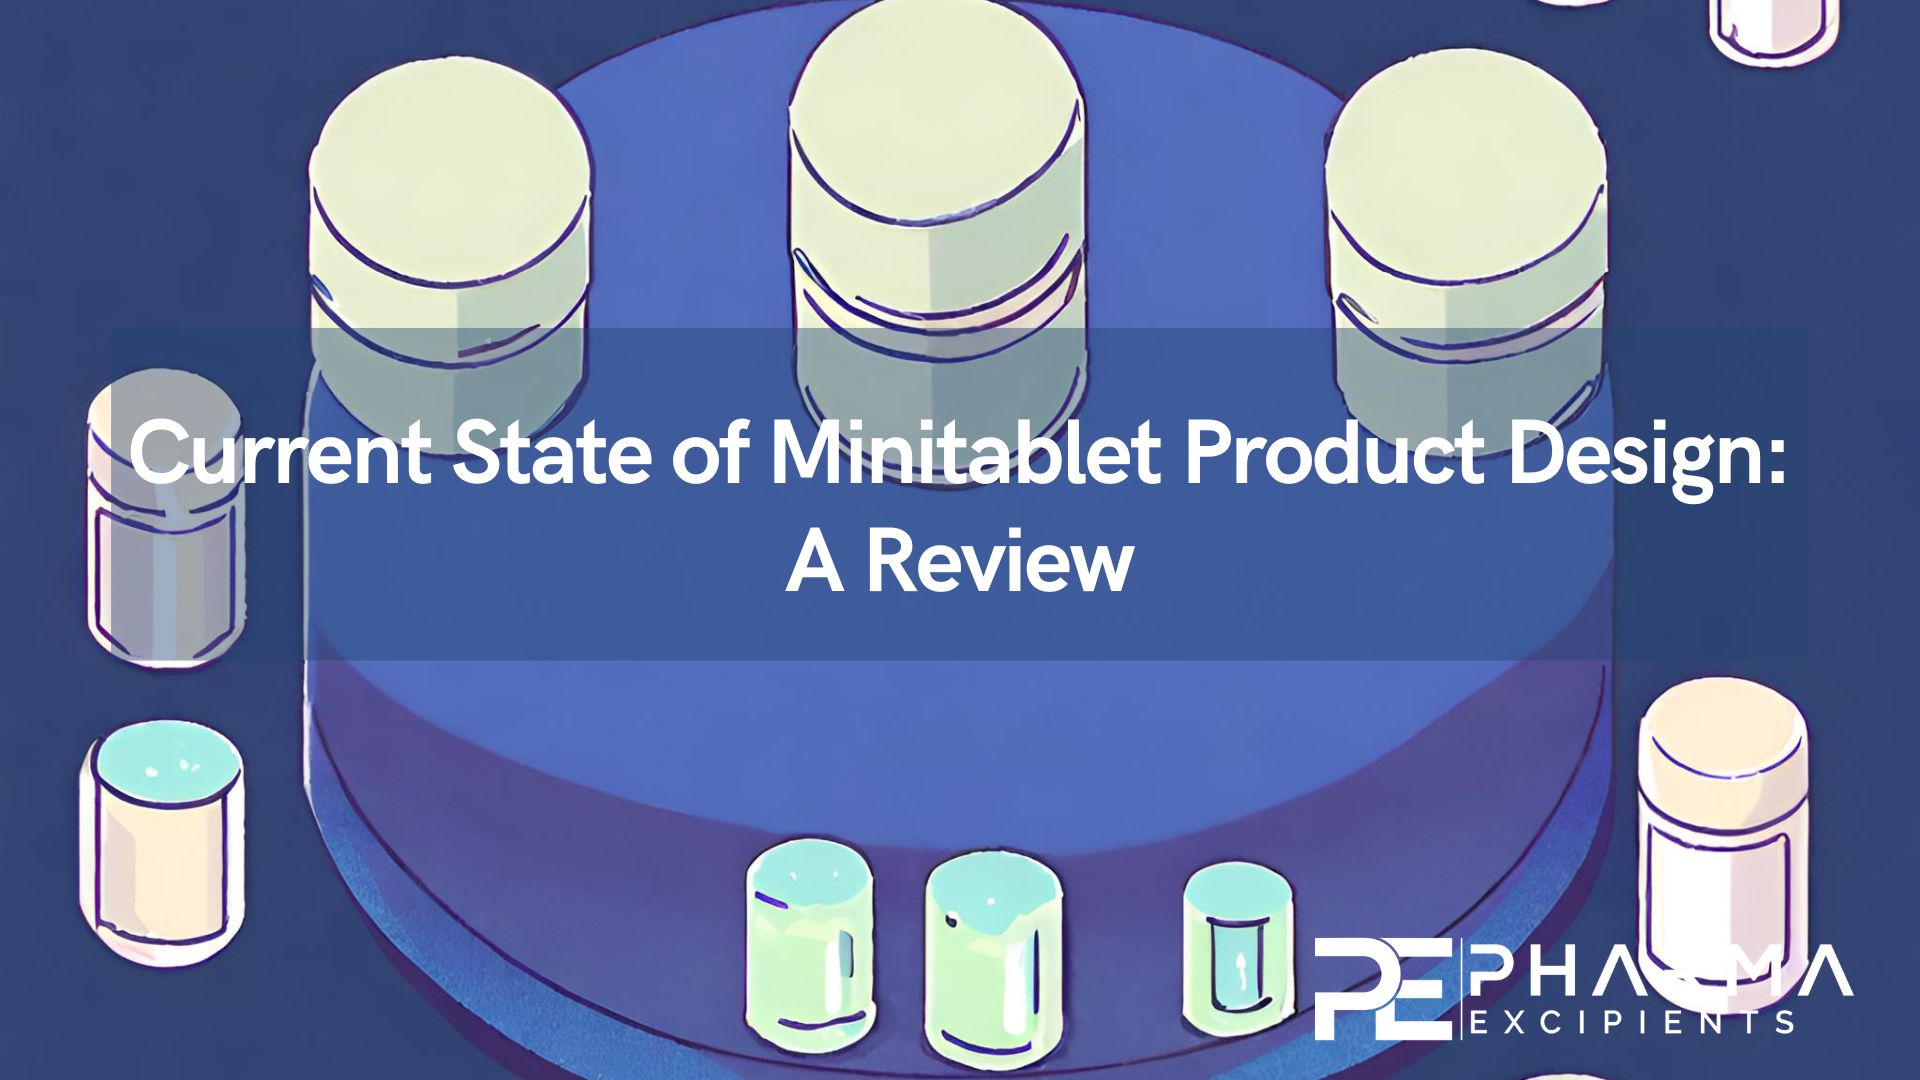 Current state of pharmaceutical minitablet product design